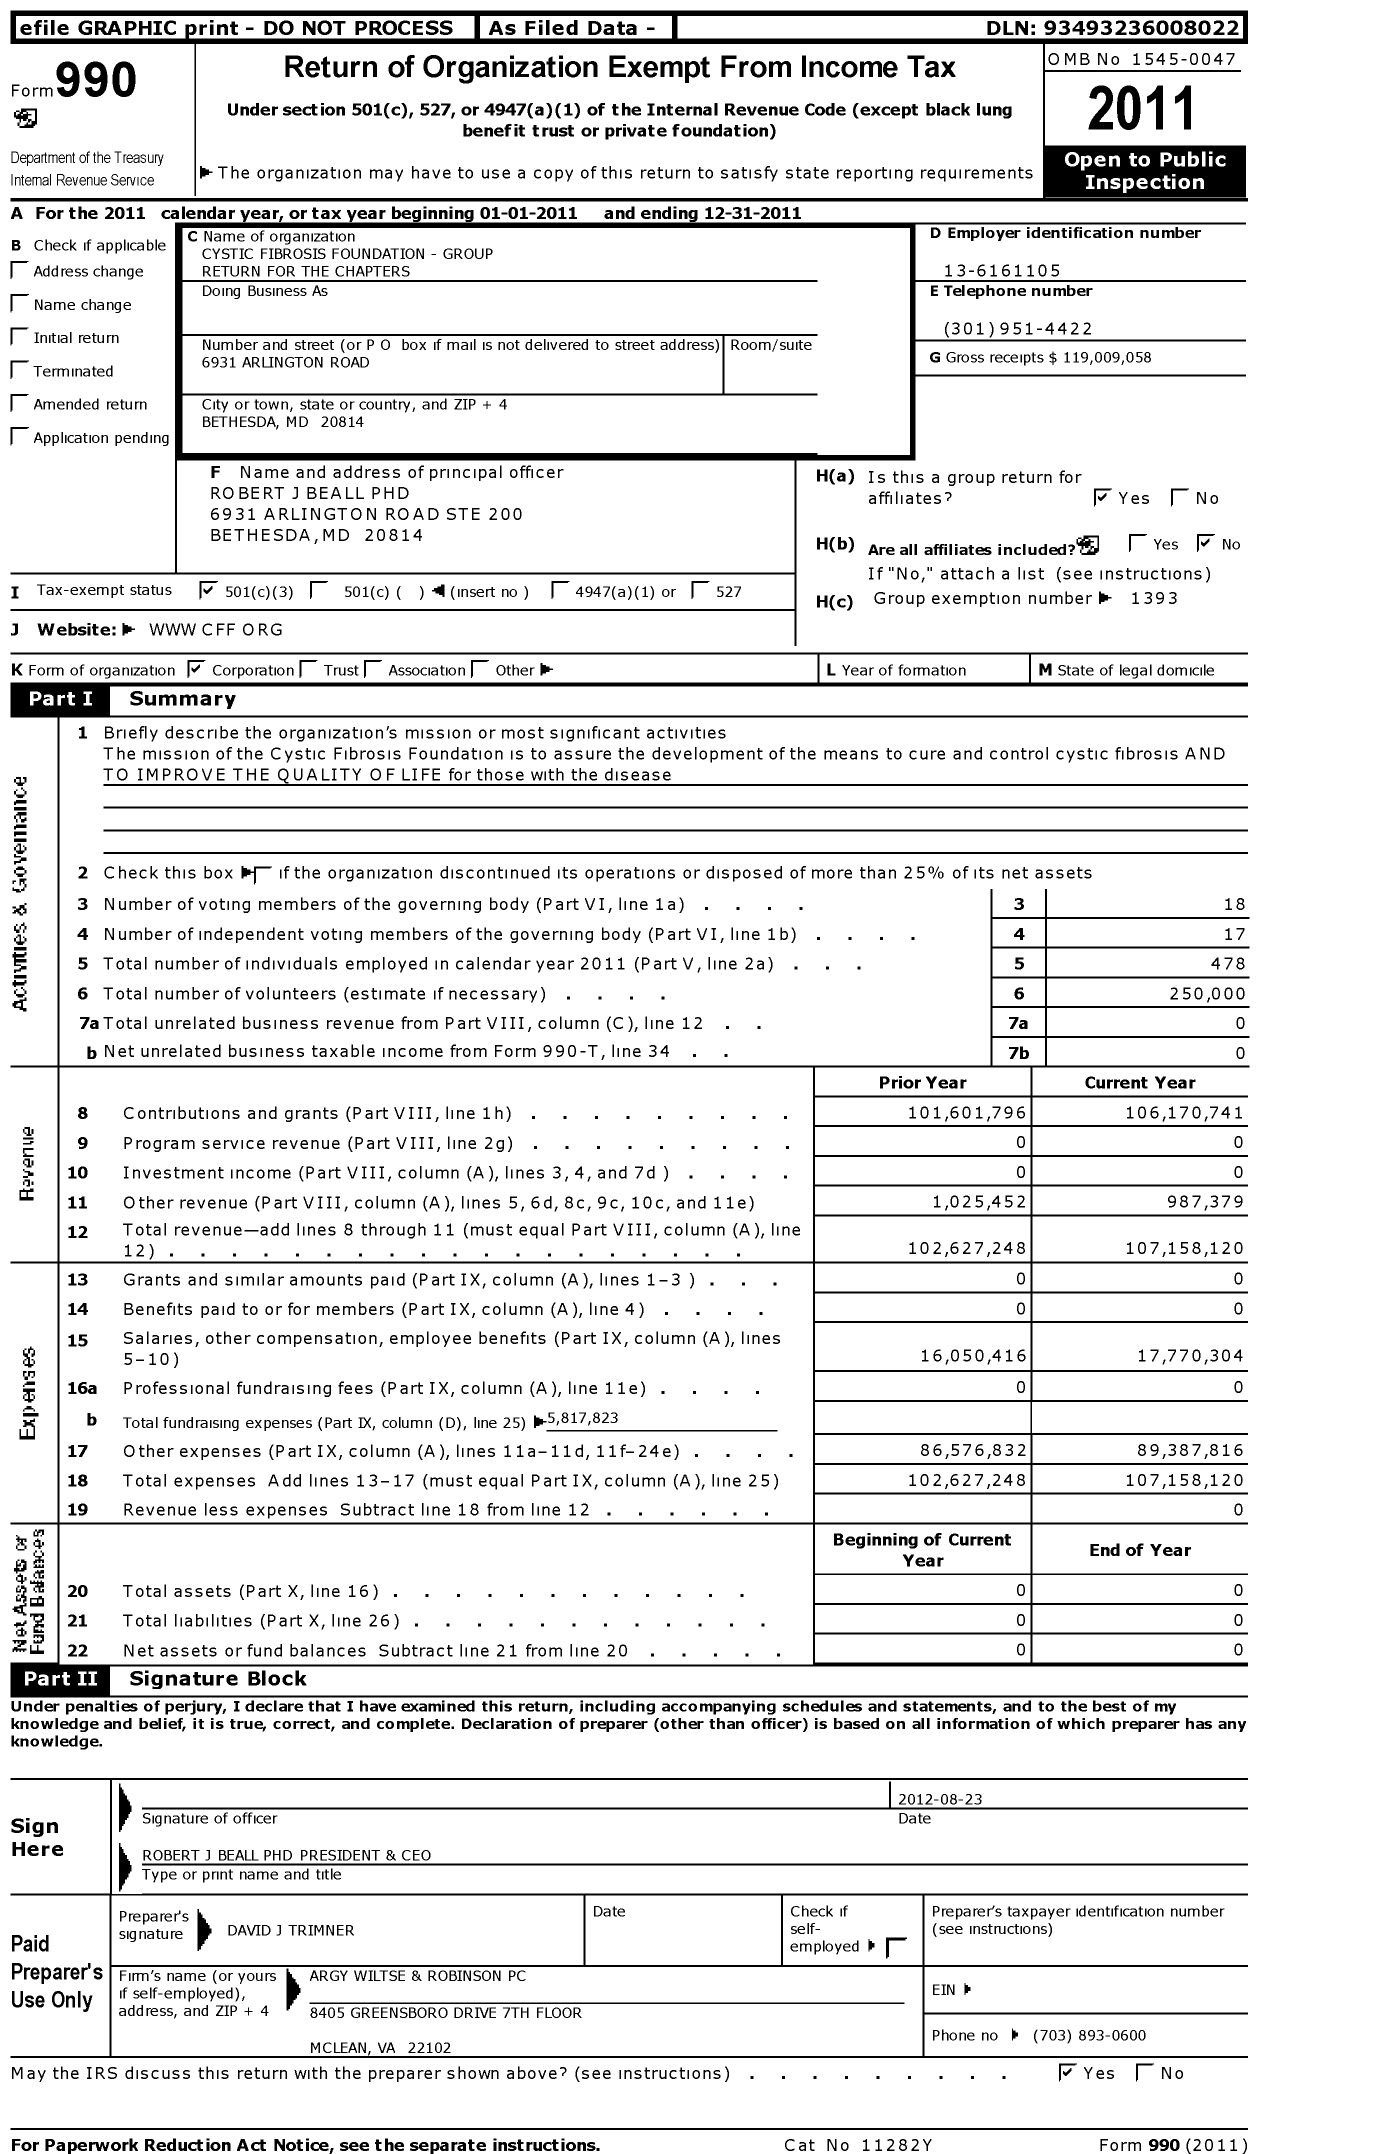 Image of first page of 2011 Form 990 for Cystic Fibrosis Foundation - Group Return for the Chapters